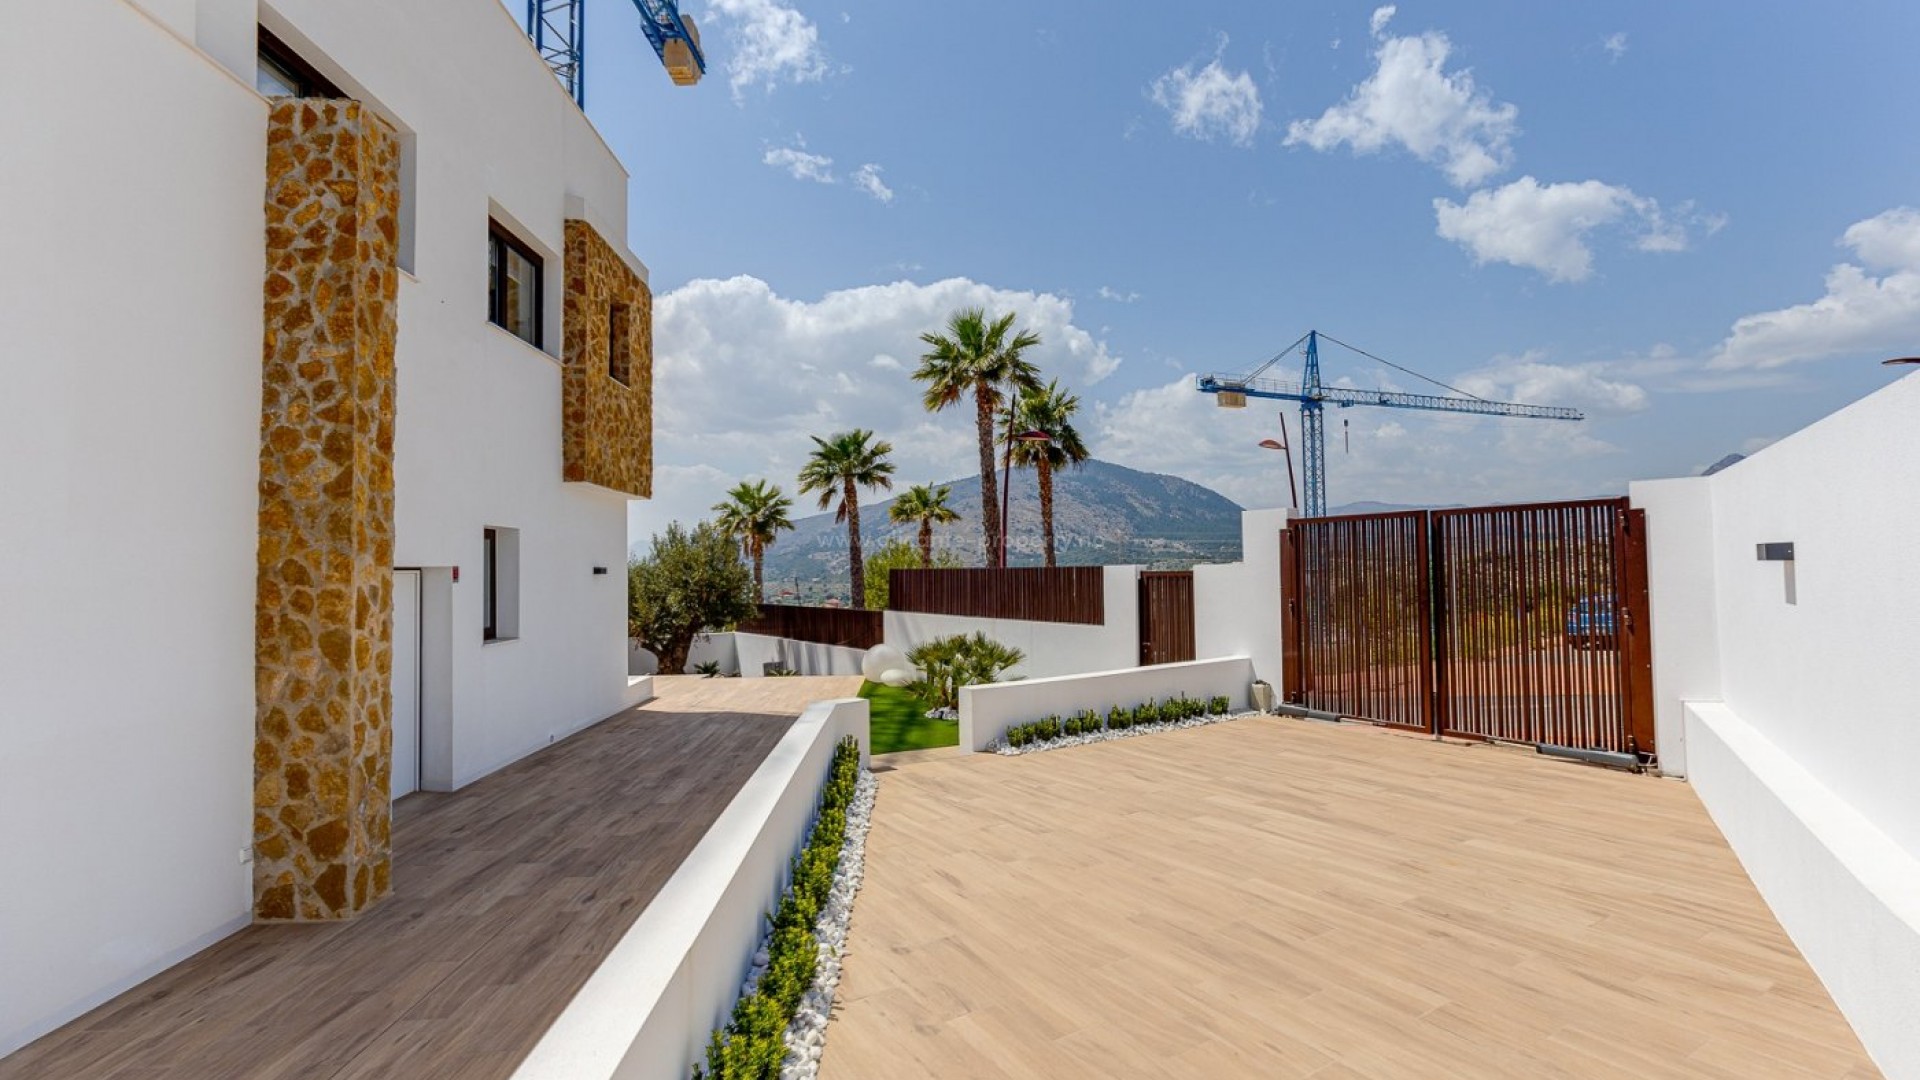 Villas in Balcon de Finestrat, 2 bedrooms and 2 bathrooms, terrace, garden, private pool and parking. 10 minutes from Benidorm and only 2 km from Finestrat.